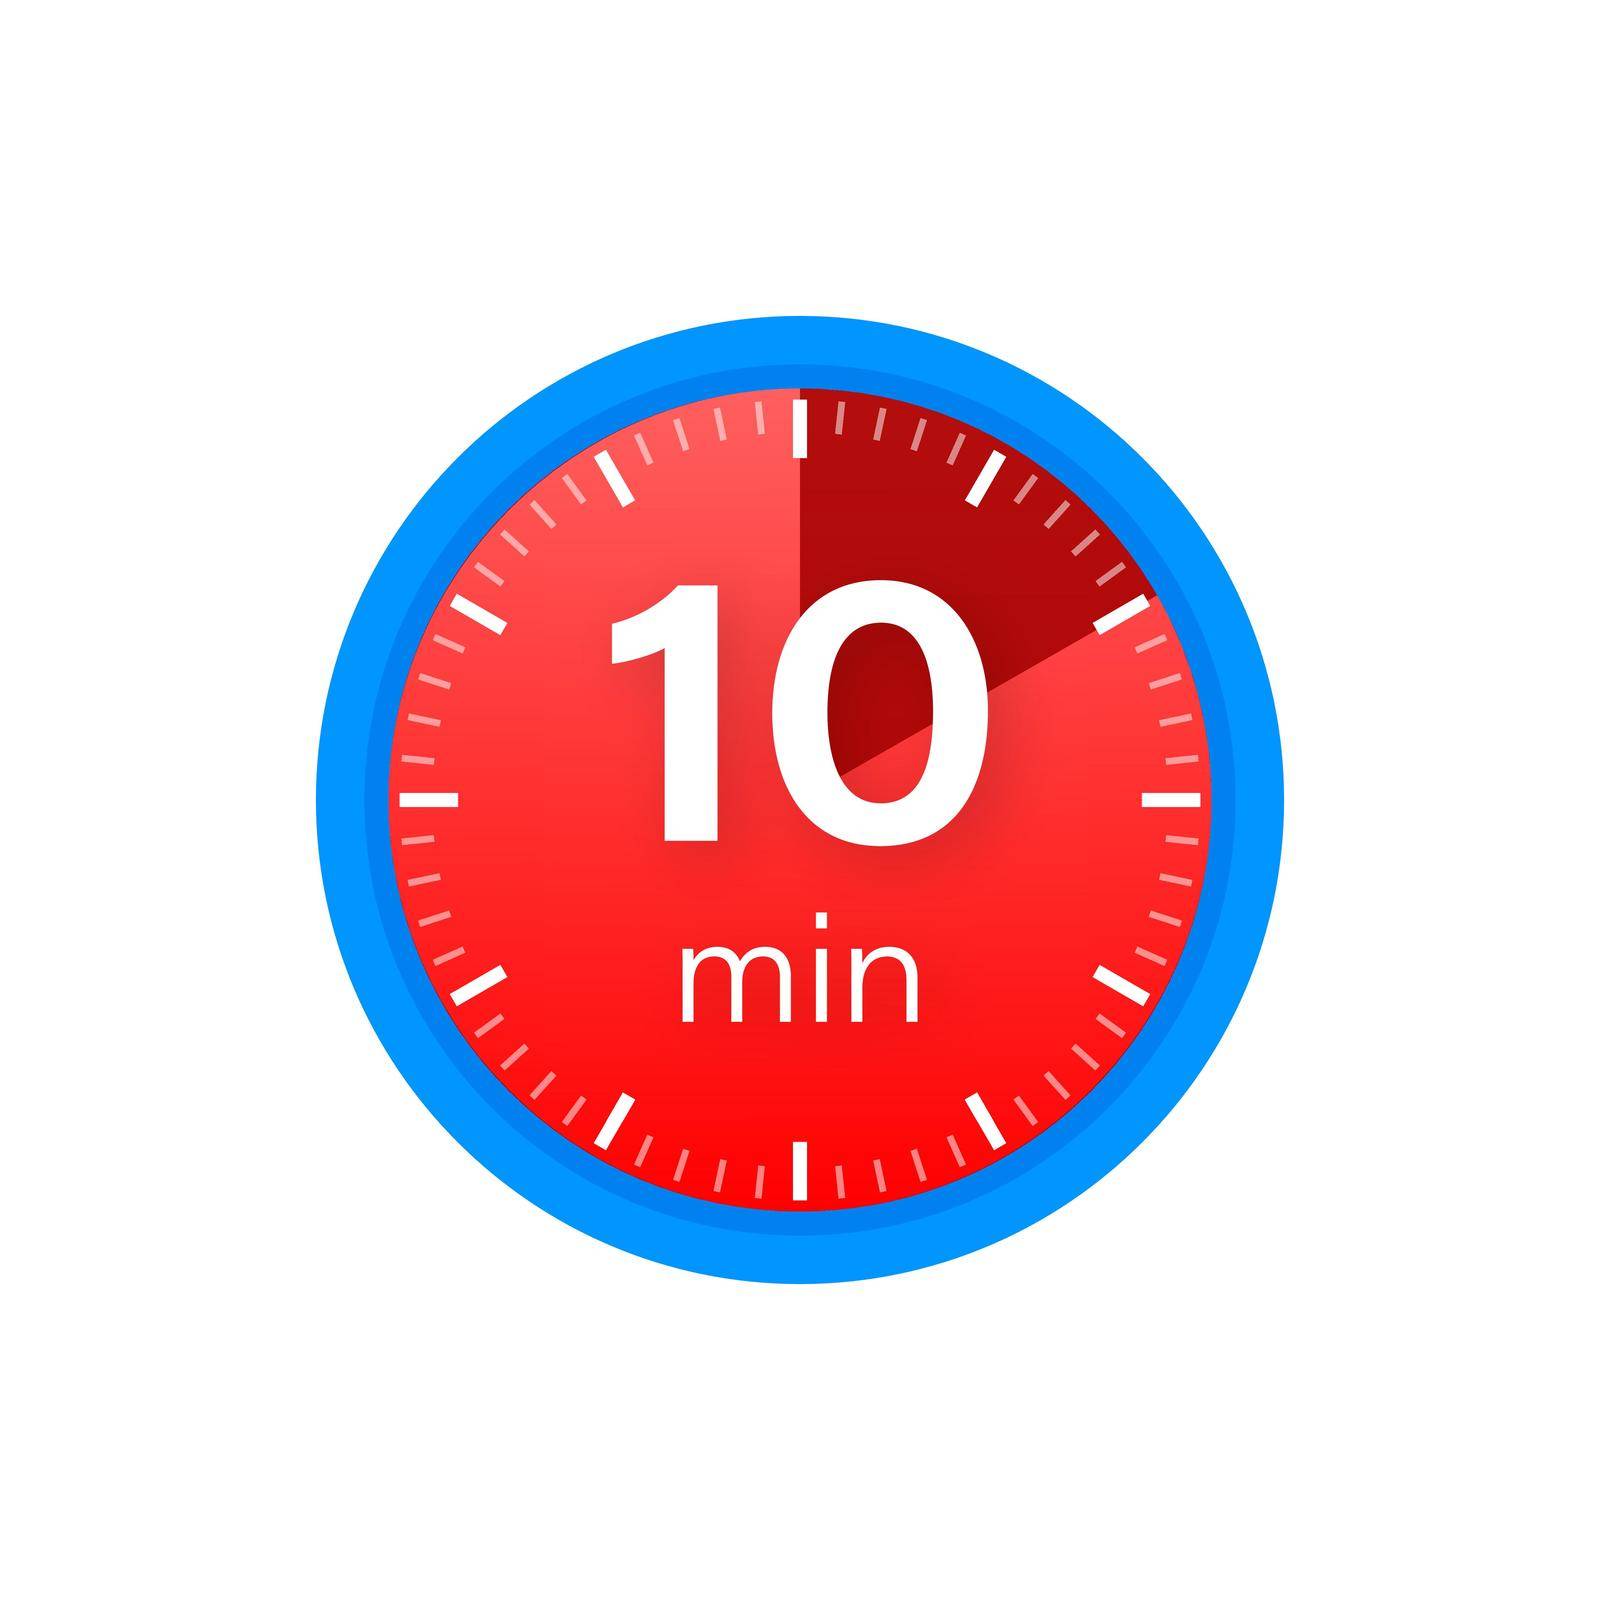 The 10 minutes, stopwatch vector icon. Stopwatch icon in flat style on a white background. Vector stock illustration.